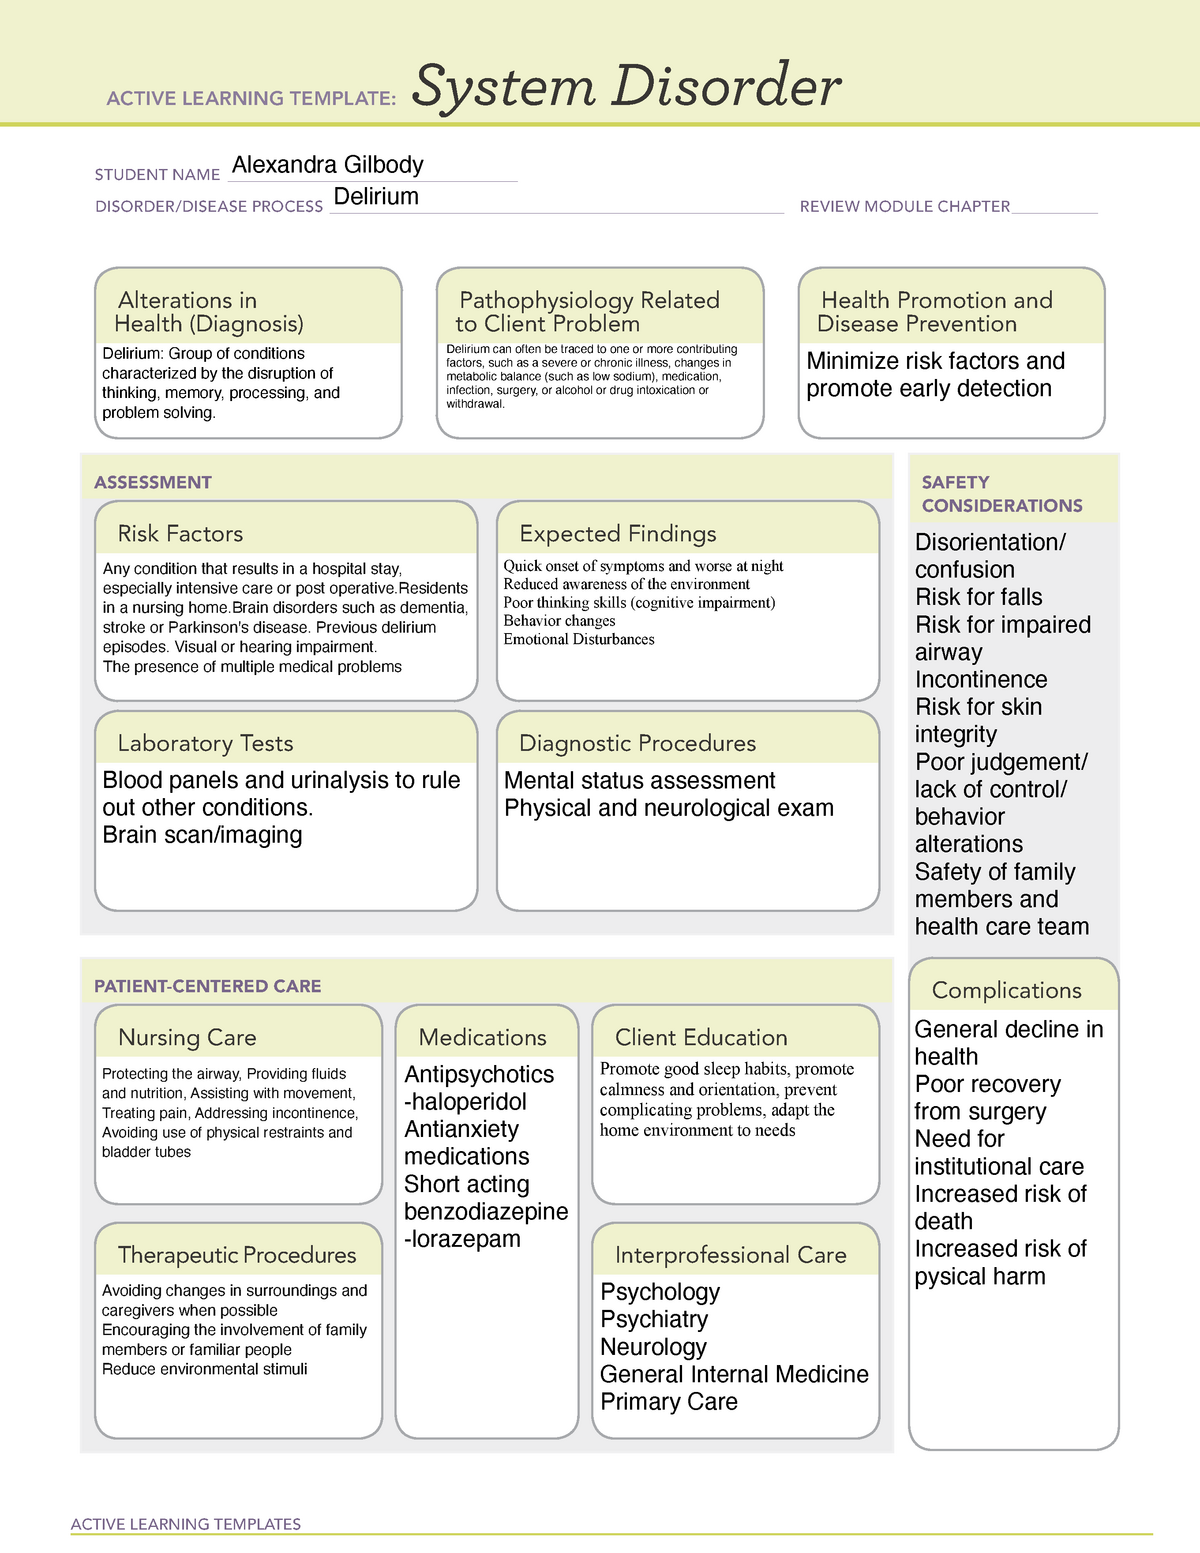 Delirium System Disorder ACTIVE LEARNING TEMPLATES System Disorder